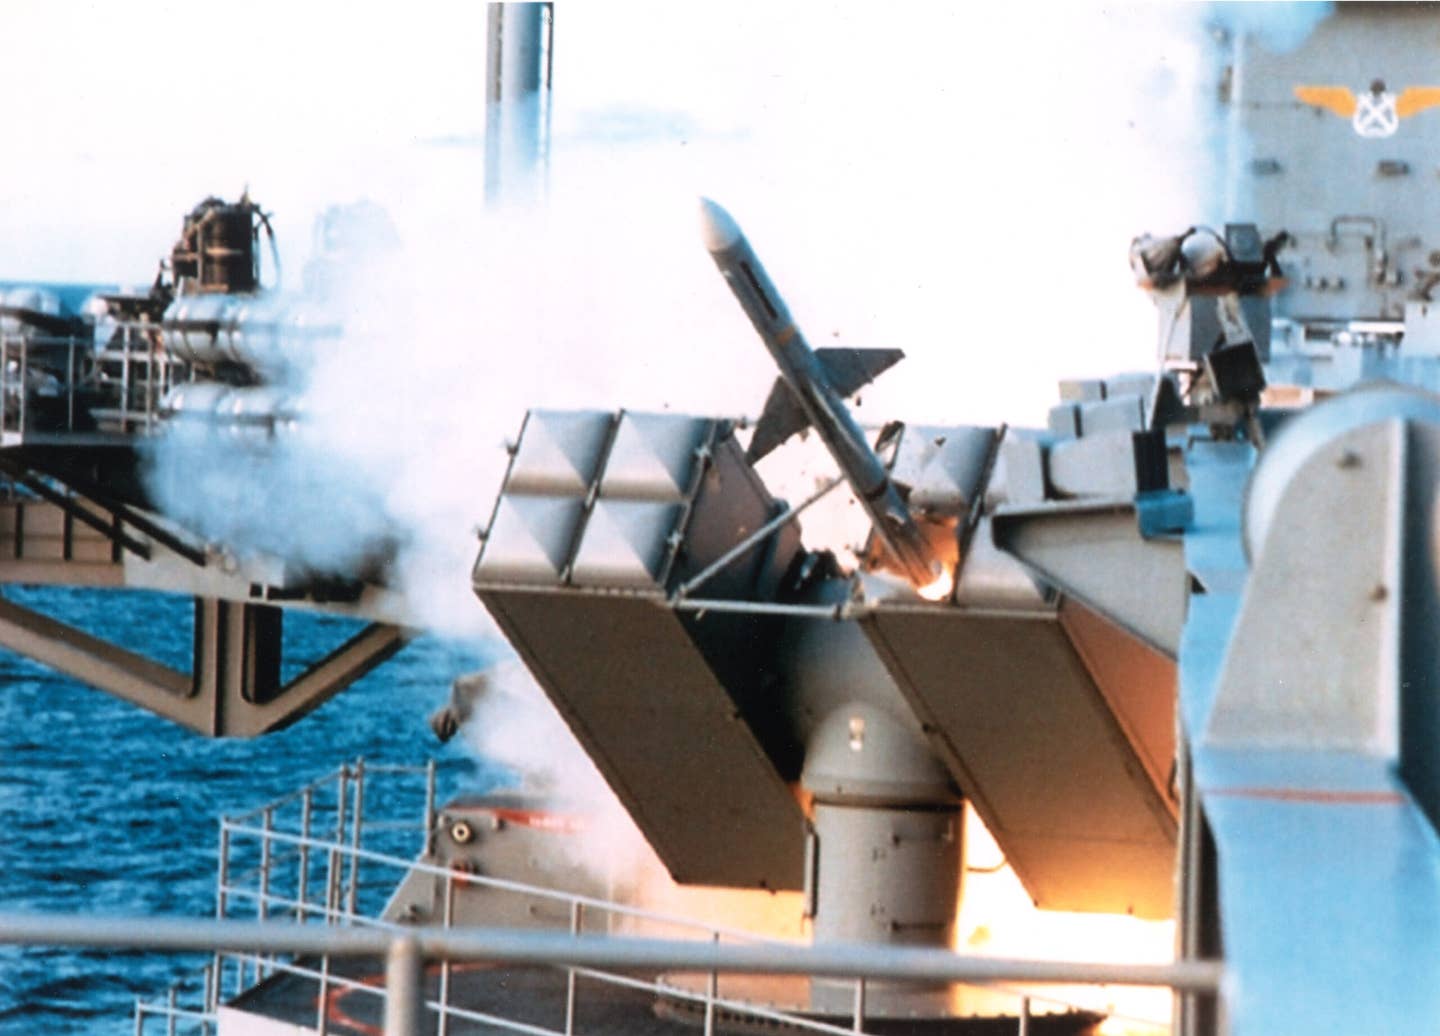 A RIM-7 Sea Sparrow missile is launched from the aircraft carrier USS <em>John C. Stennis</em> (CVN-74) during an exercise in August 1997. <em>U.S. Navy</em>